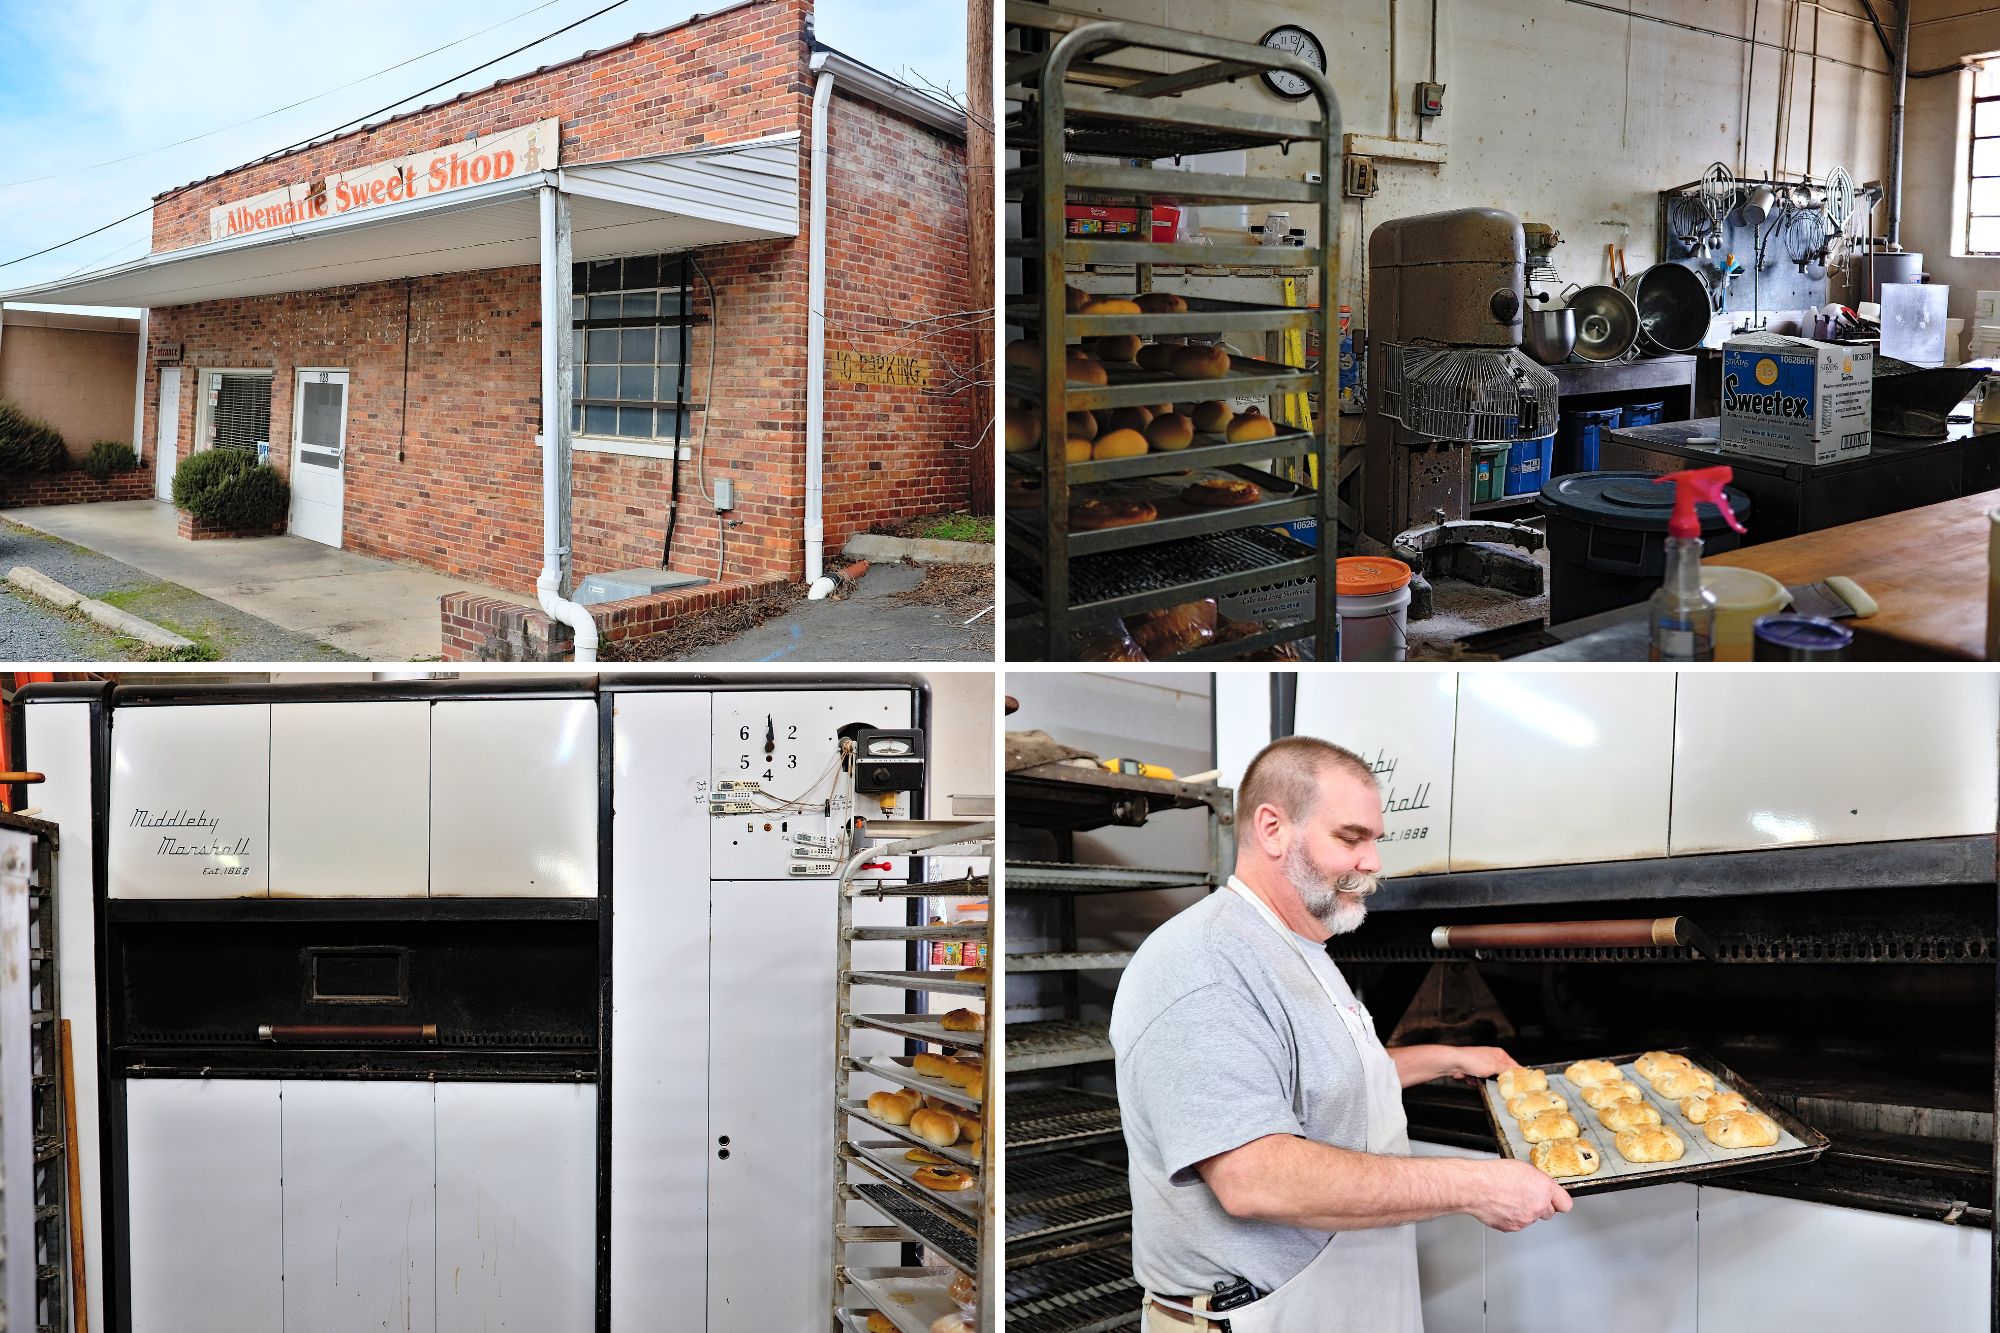 Collage of images of Albemarle Sweet Shop showing the exterior and the kitchen